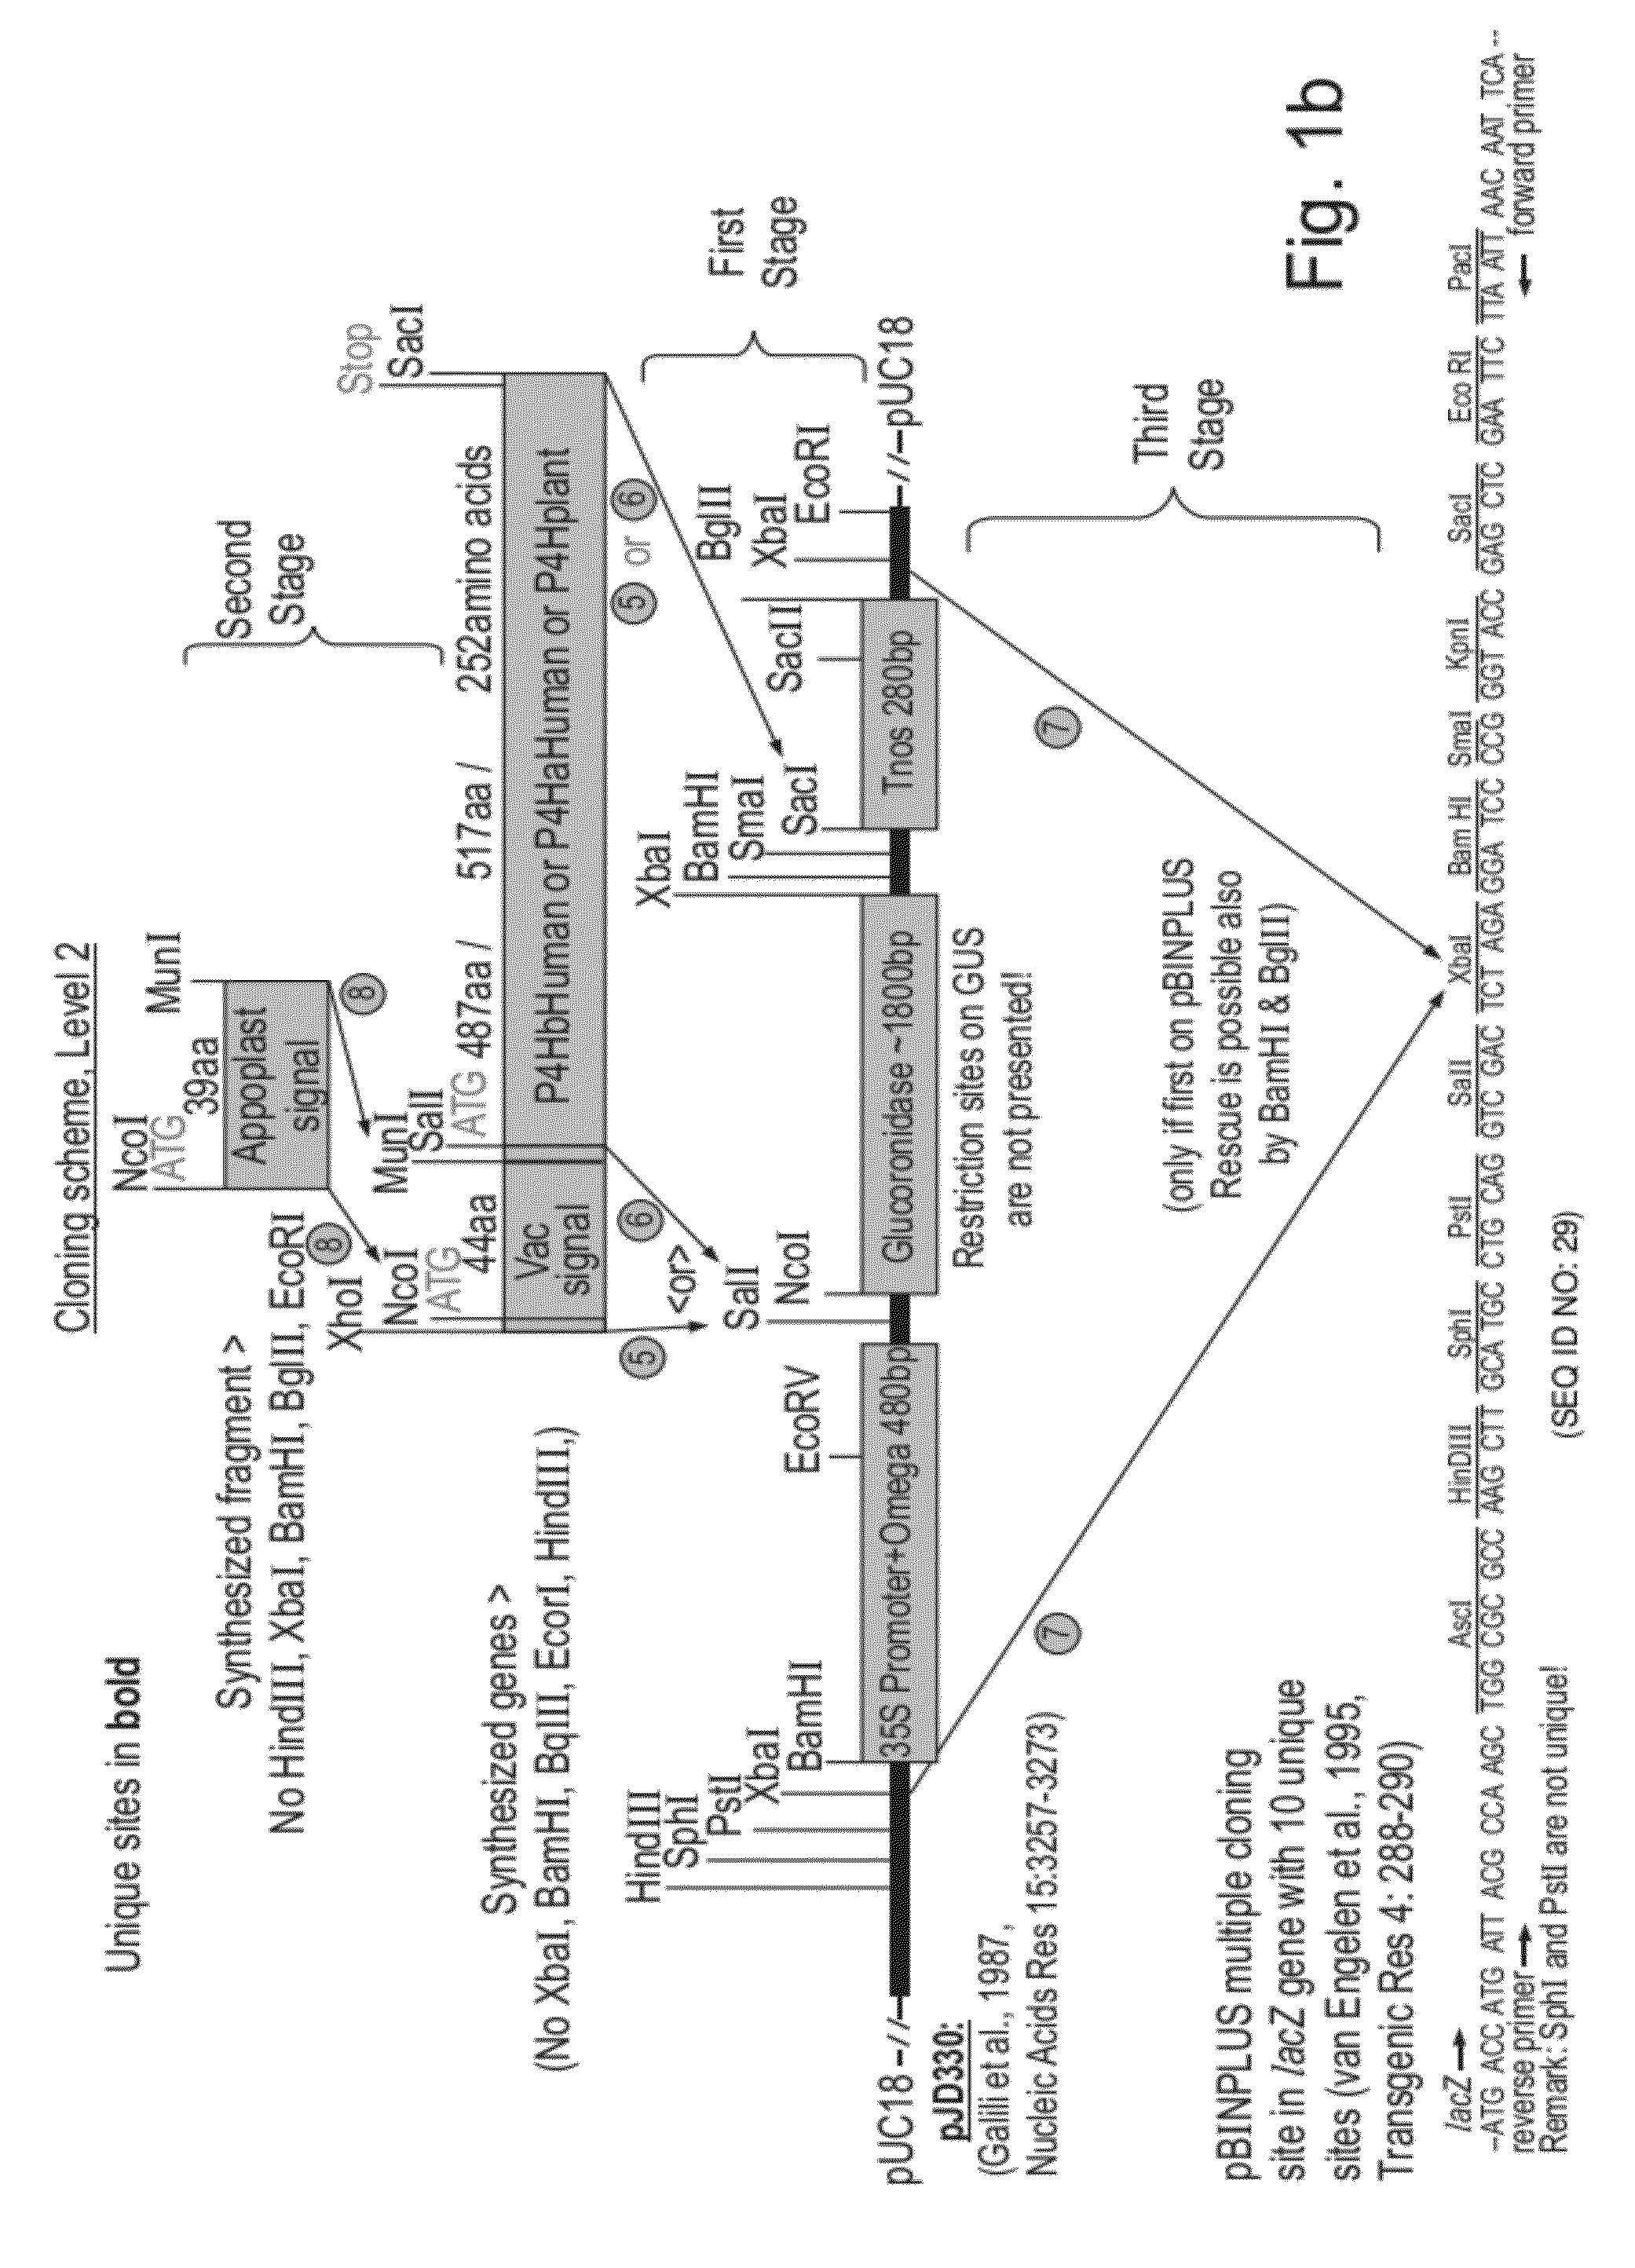 Collagen producing plants and methods of generating and using same